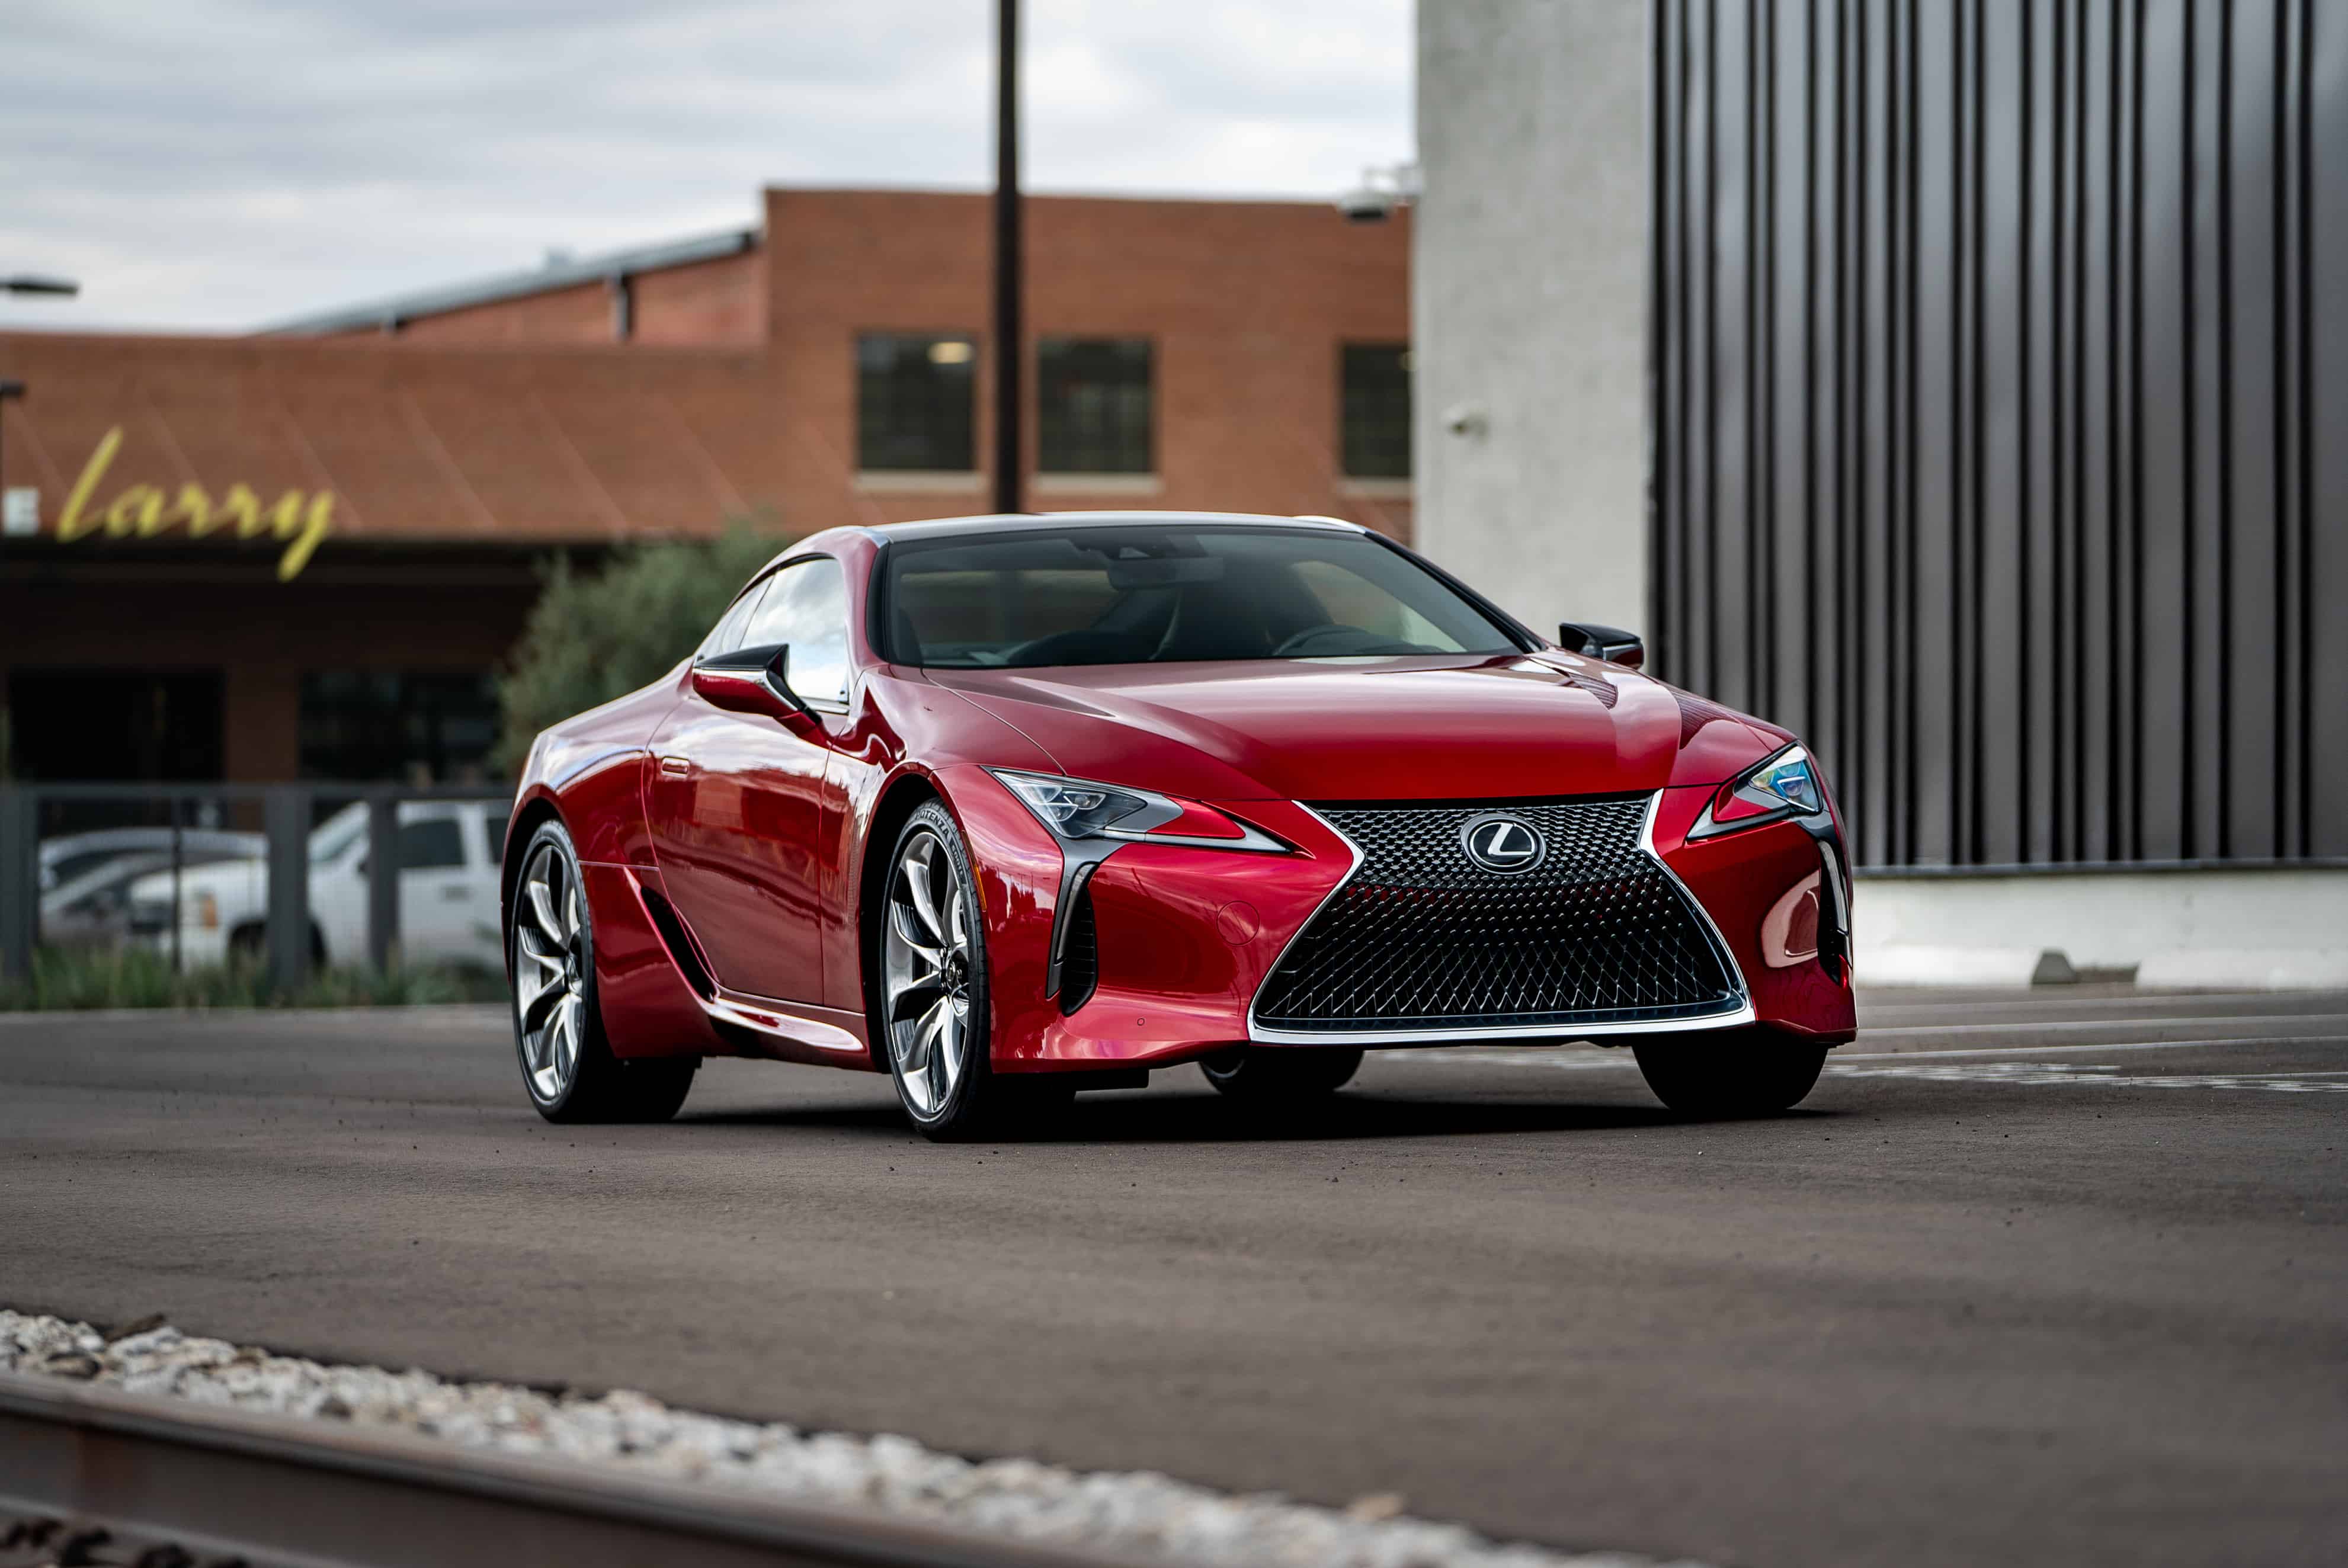 Driven Is Lexus LC500 style worth the 100k price tag? ClassicCars